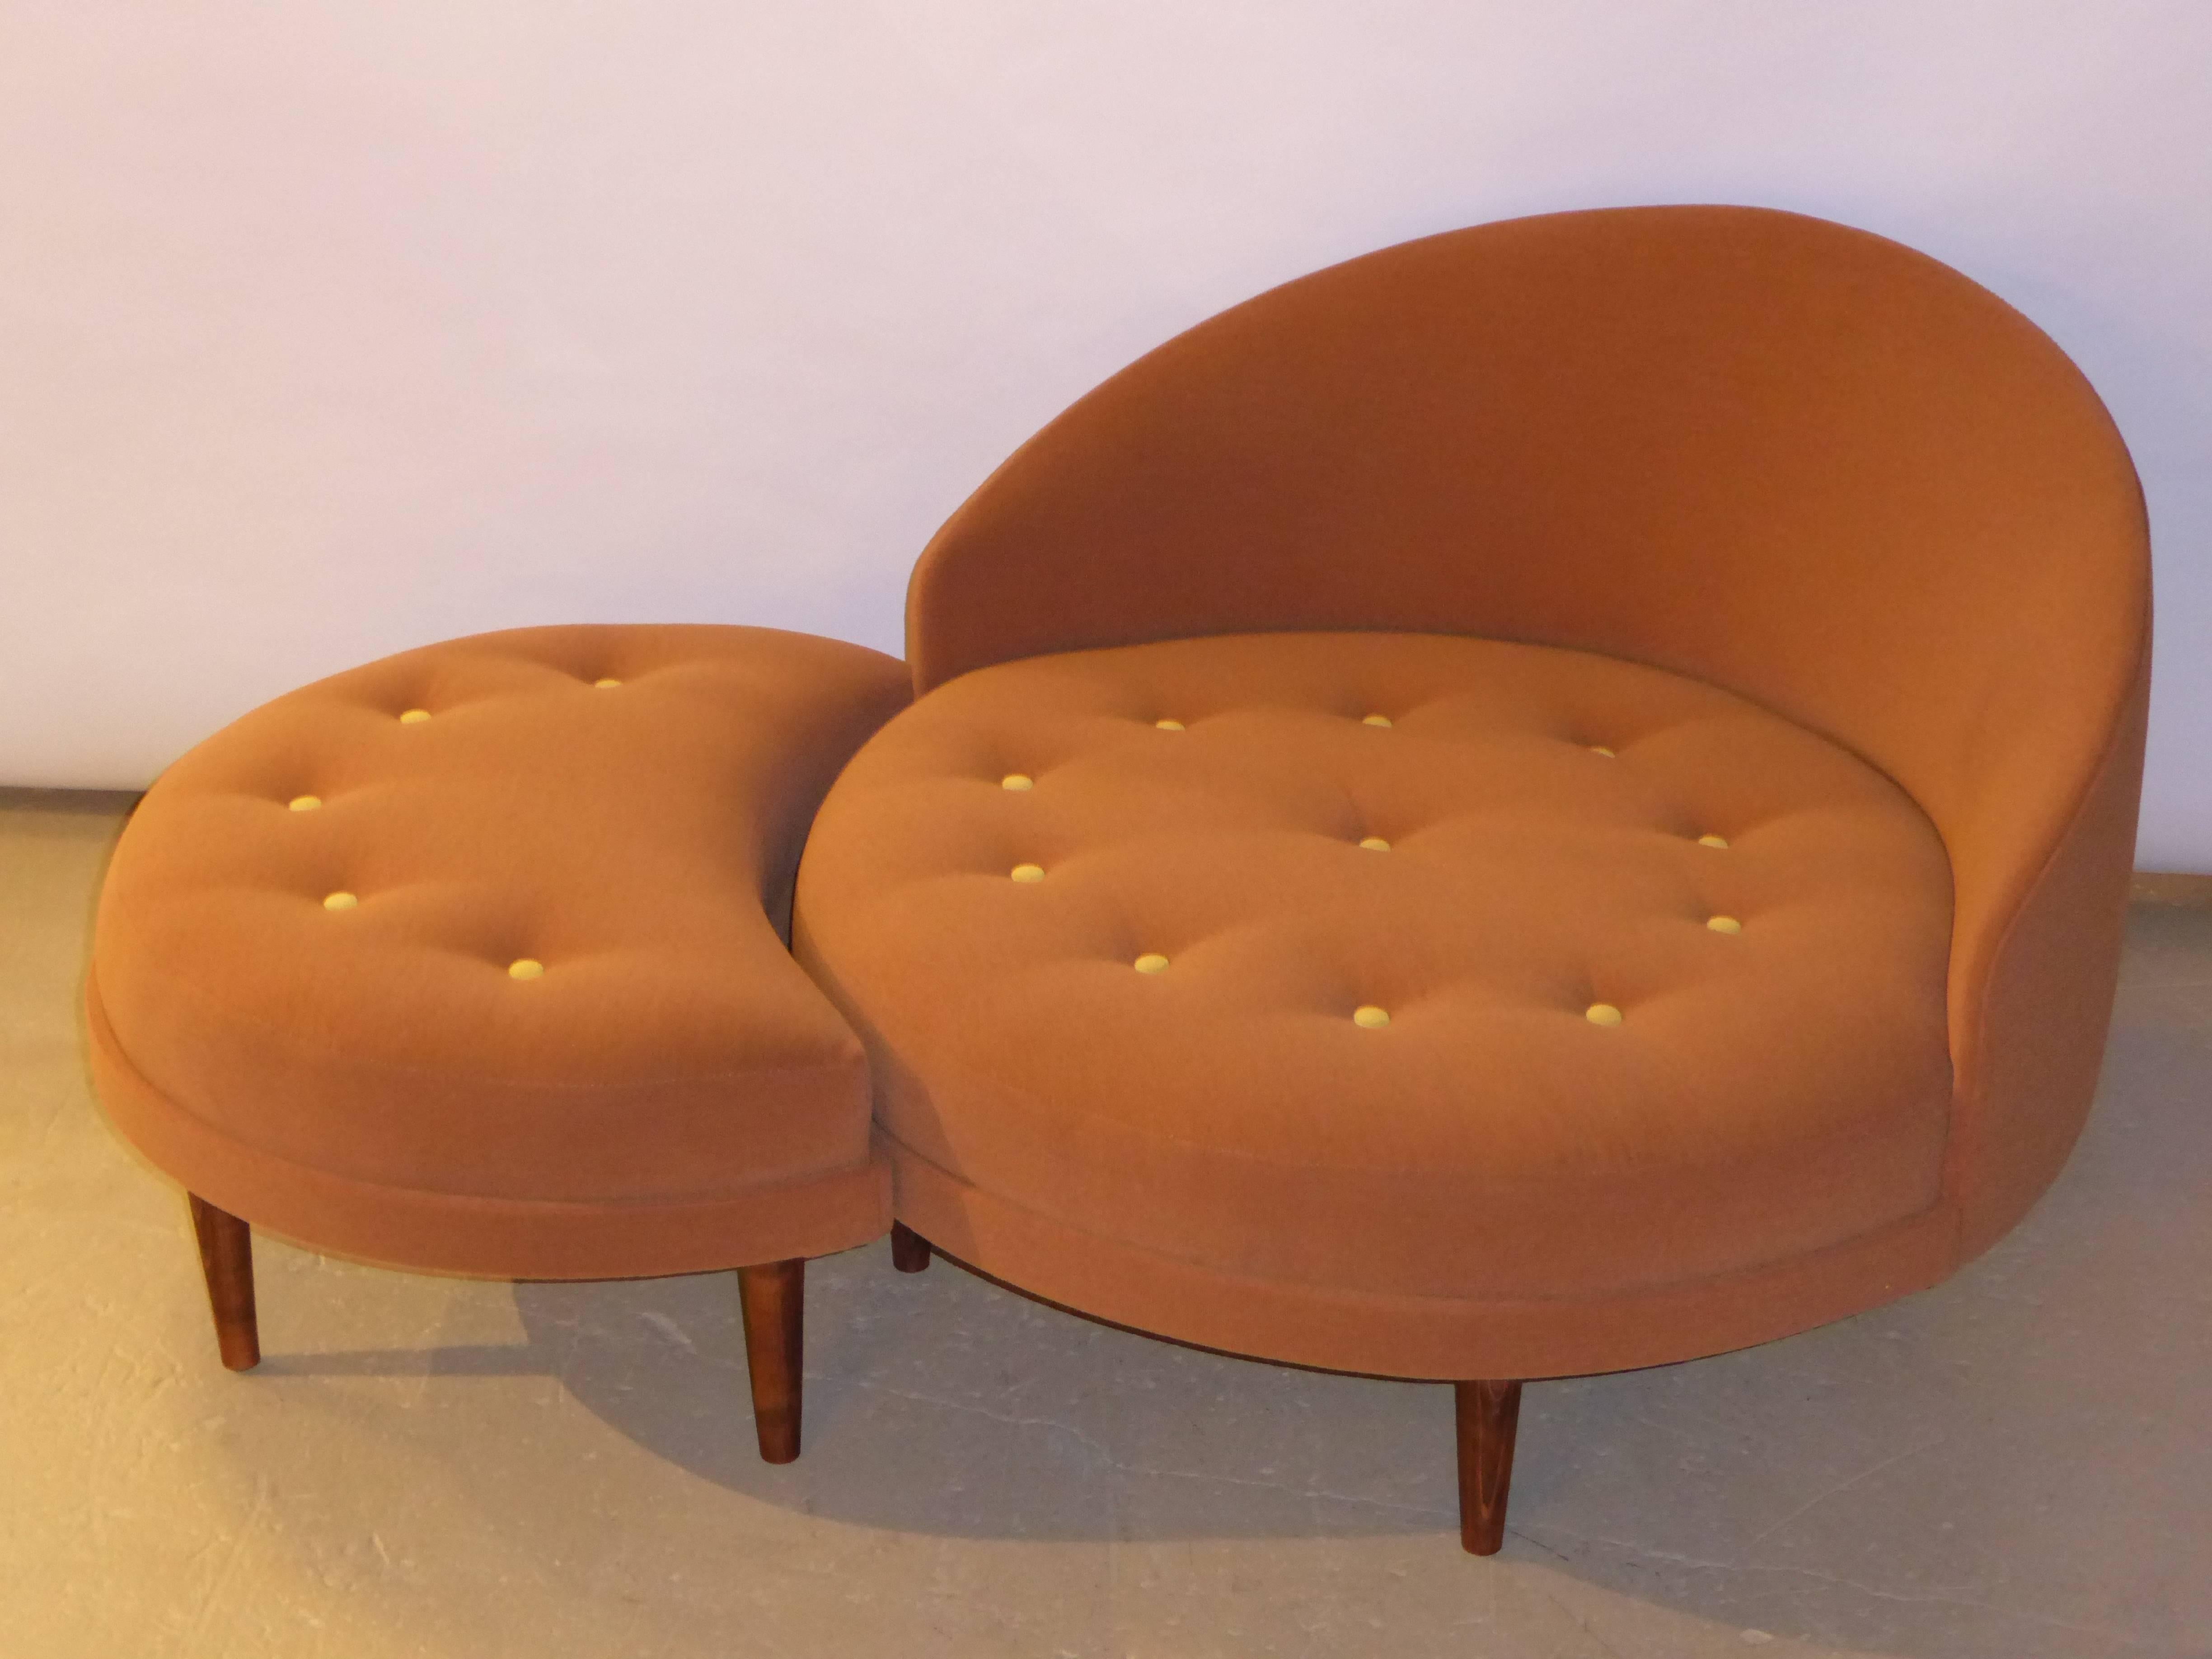 Wonderful tony design by Adrian Pearsall for his firm Craft Associates, this button tufted lounge chair with fitted ottoman has a comfortable low scale, sporting fat tapered walnut legs. The fitted 3/4 moon shaped ottoman with the same walnut legs.